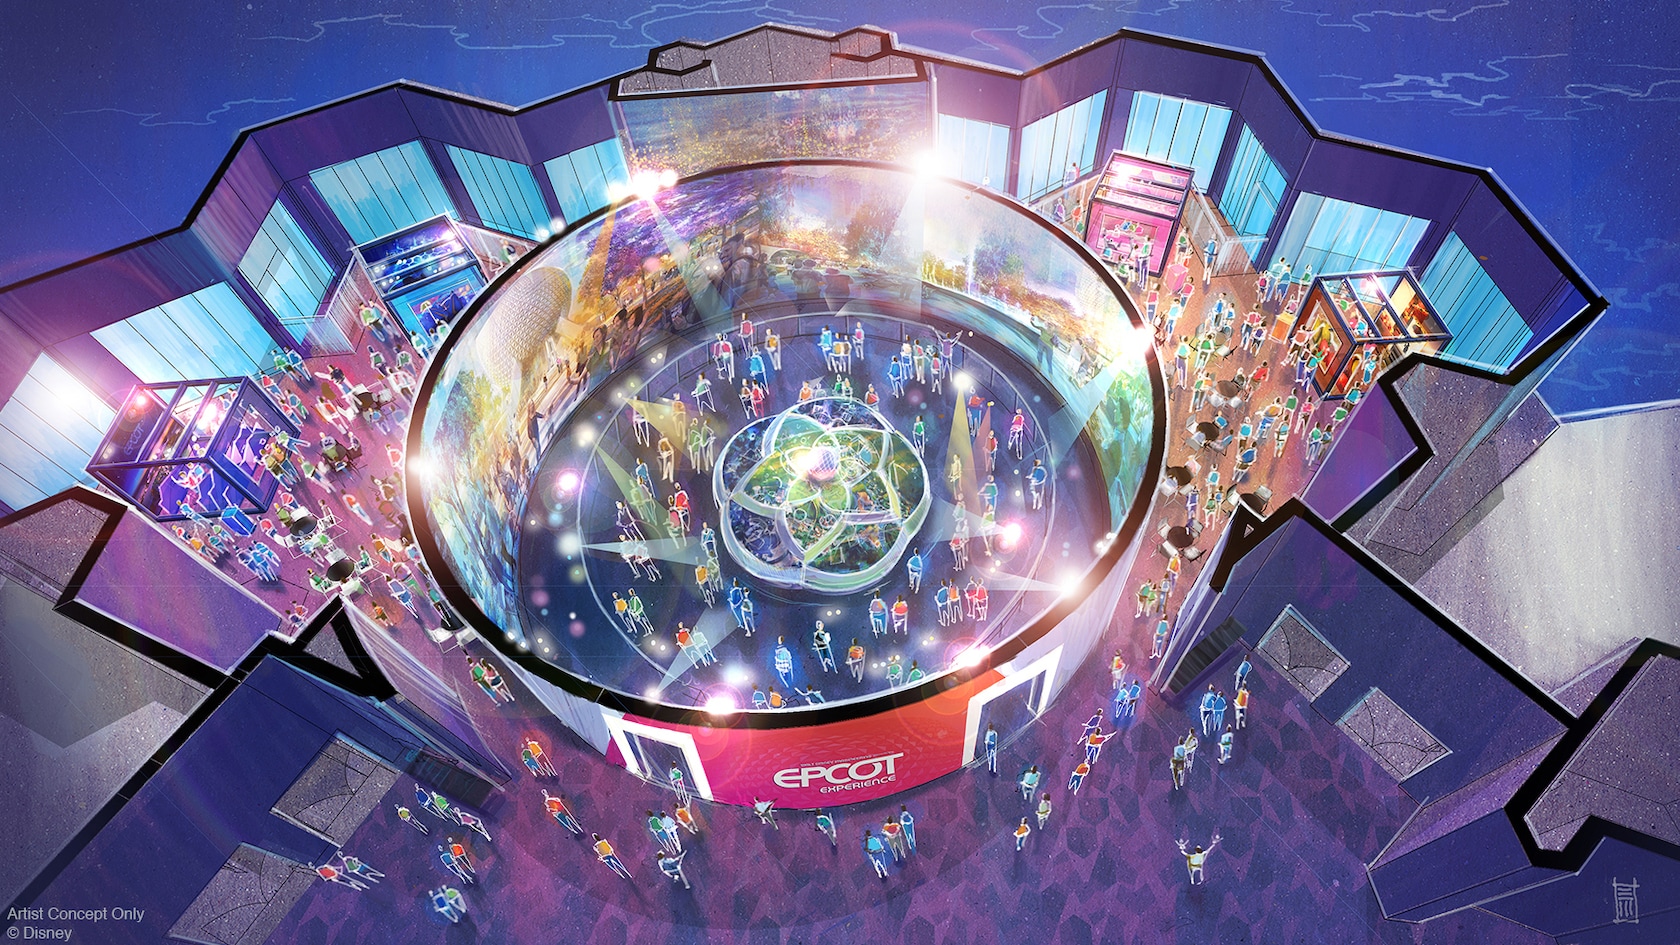 An artists rendering of the exhibits on display at Walt Disney Imagineering Presents the Epcot Experience 